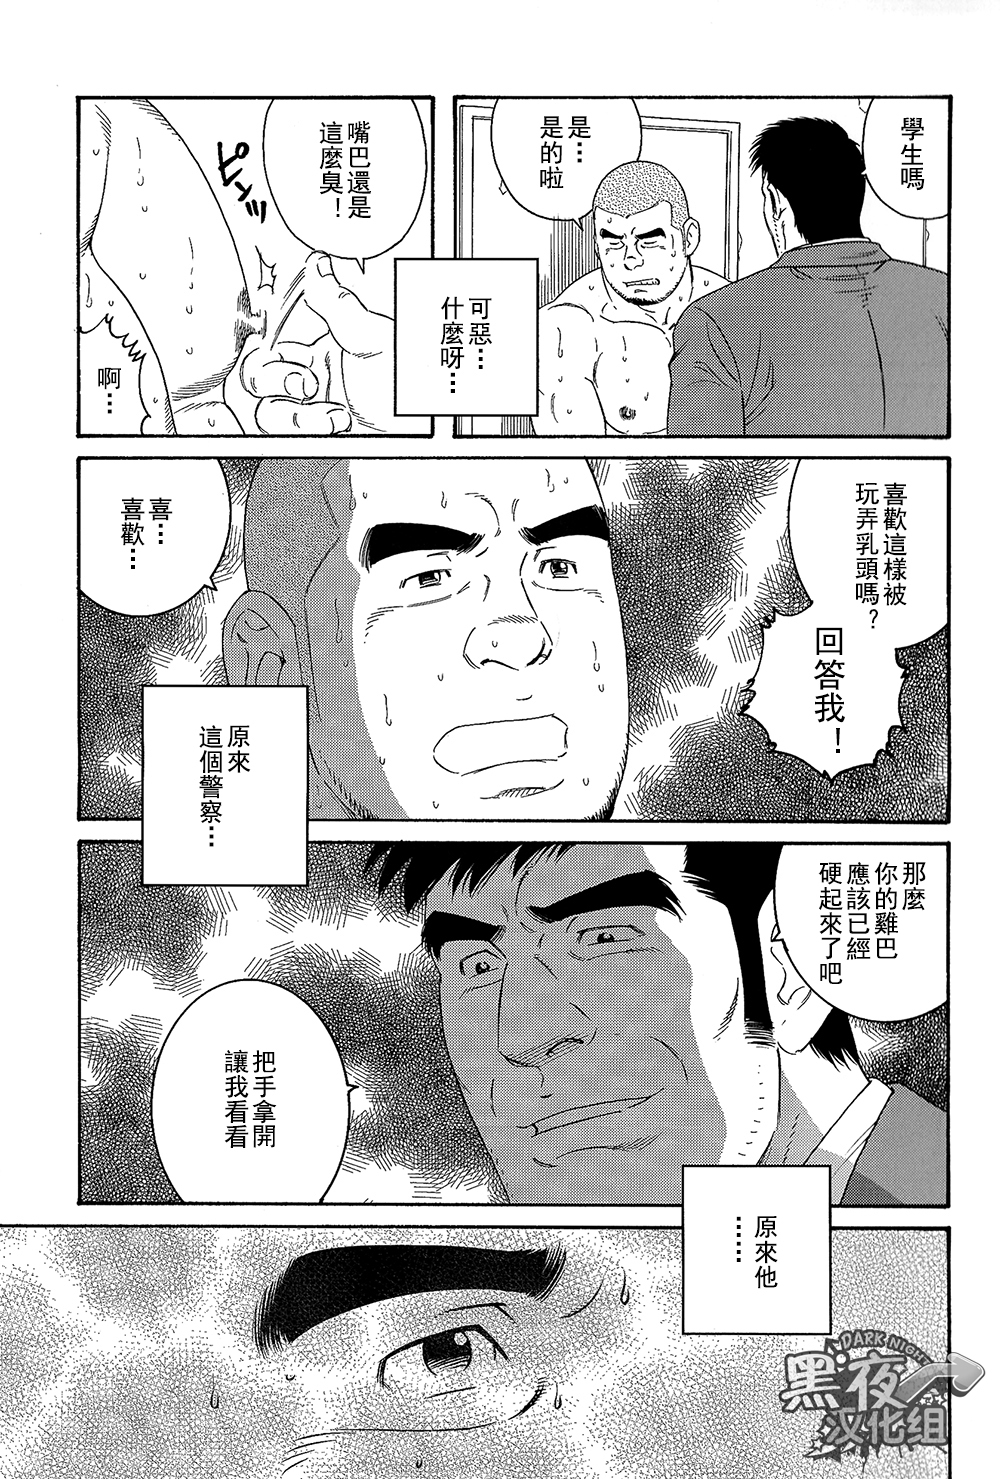 [Tagame Gengoroh] Endless Game [Chinese] [黑夜汉化组] page 11 full